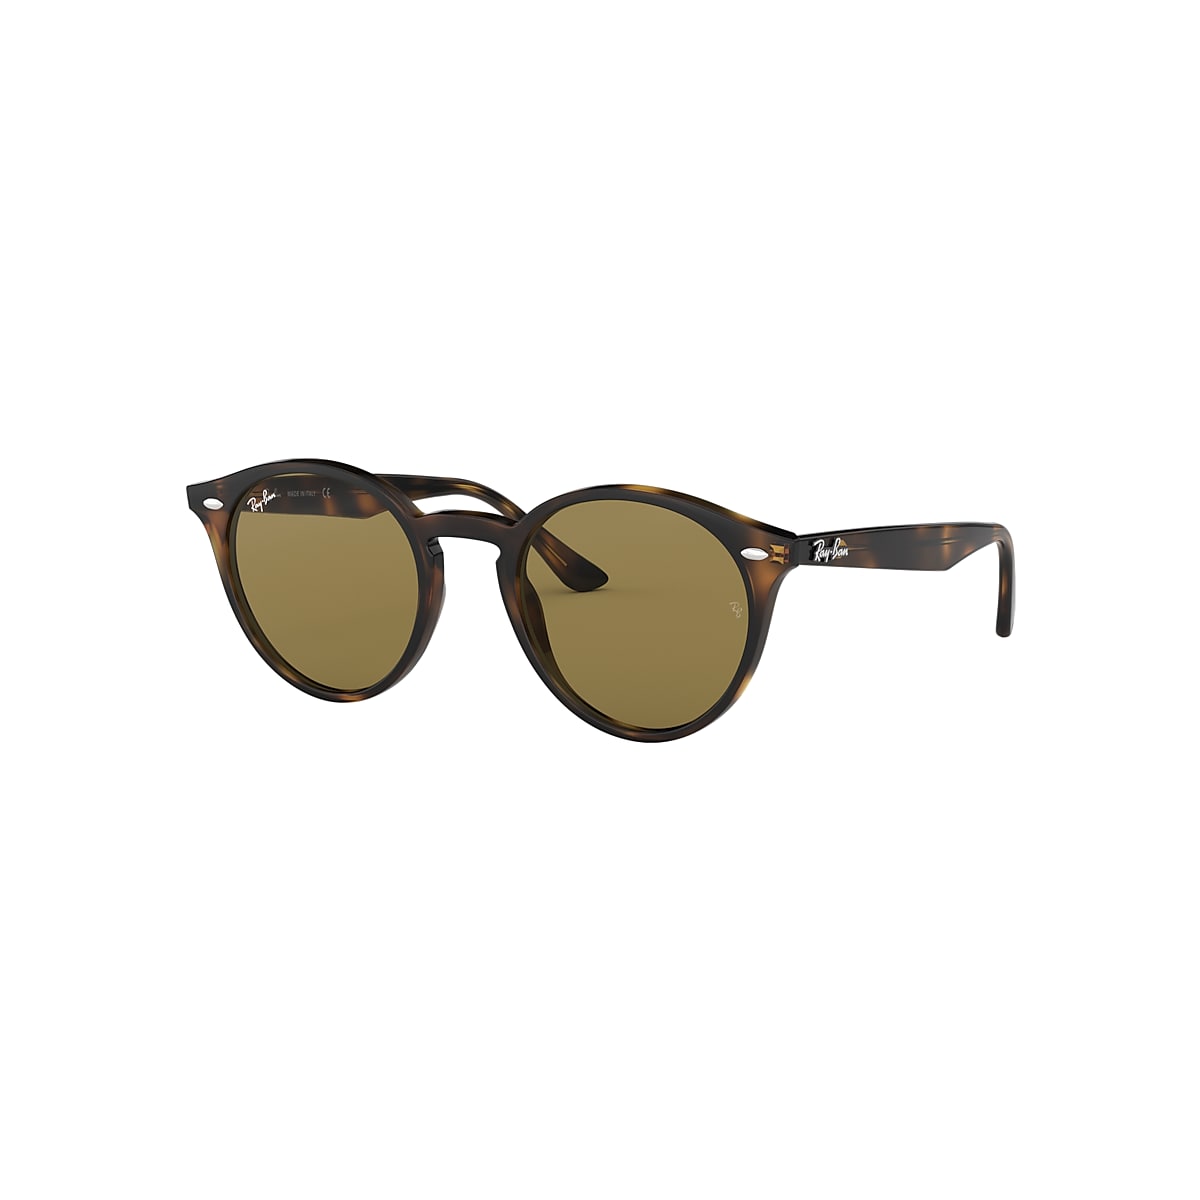 RB2180 Sunglasses in Light Havana and Brown - RB2180 | Ray-Ban® US